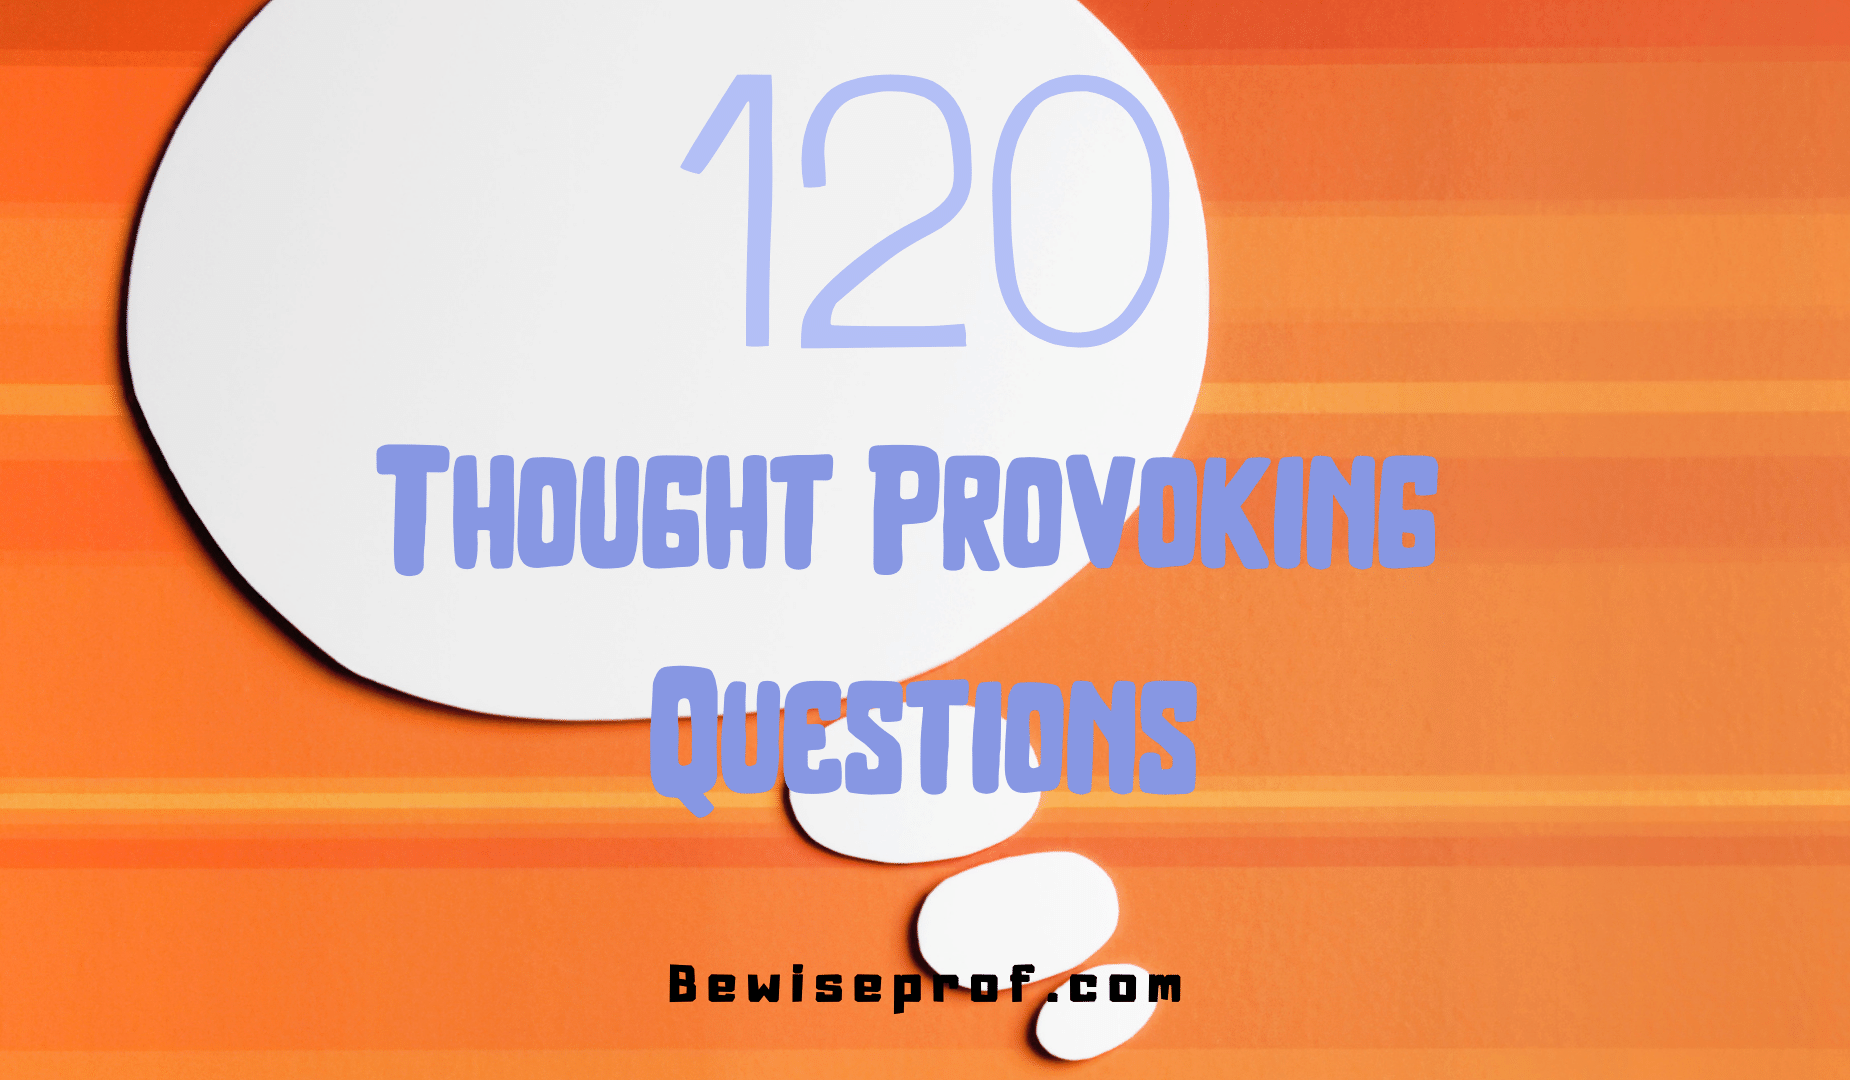 120 Thought Provoking Questions